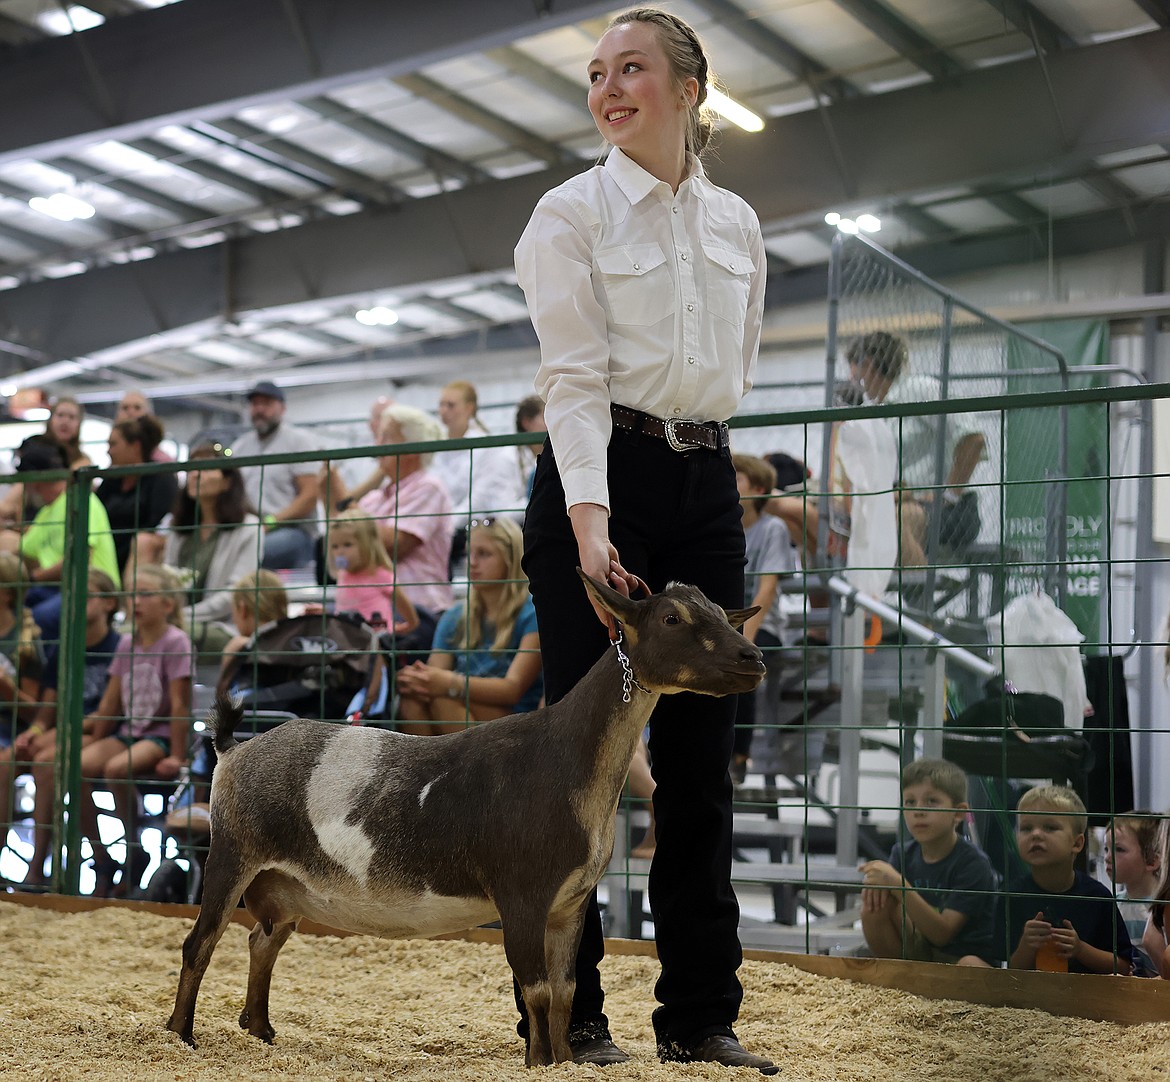 Kalispell's Brynn Mason keeps eye contact with the judge during goat judging at the Northwest Montana Fair Aug. 18. (Jeremy Weber/Daily Inter Lake)